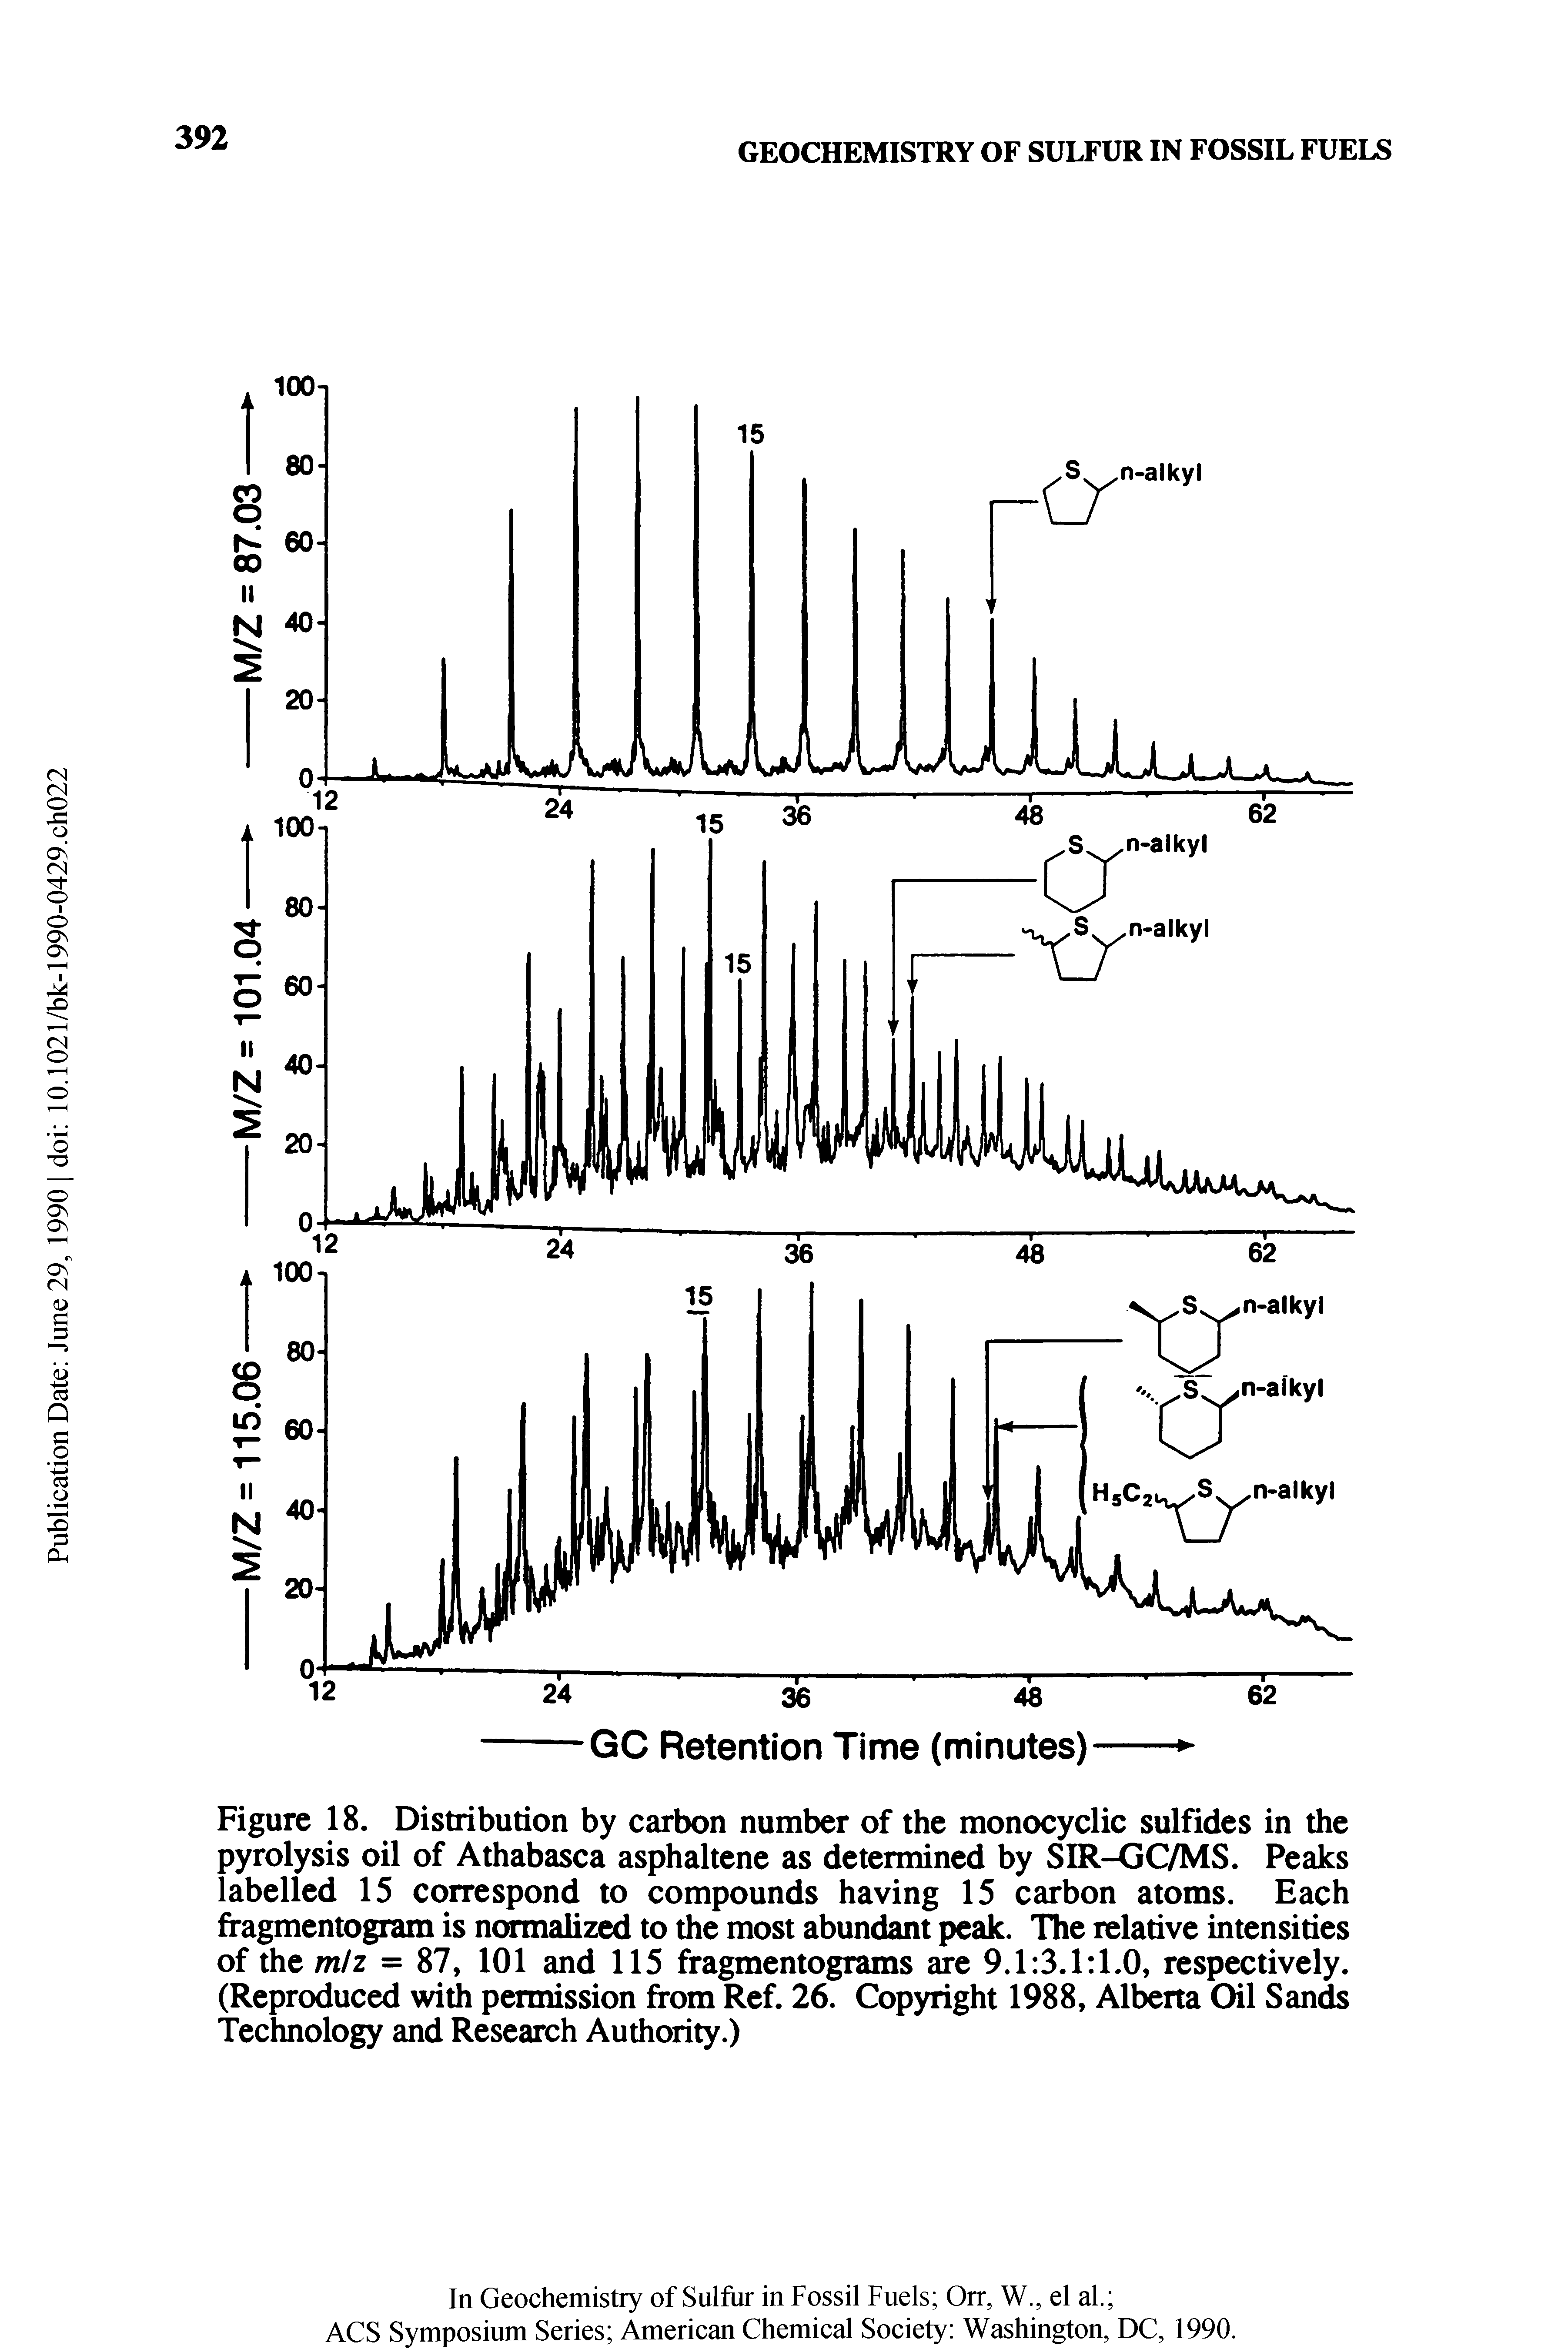 Figure 18. Distribution by carbon number of the monocyclic sulfides in the pyrolysis oil of Athabasca asphaltene as determined by SIR-GC/MS. Peaks labelled 15 correspond to compounds having 15 carbon atoms. Each fragmentogram is normalized to the most abundant peak. The relative intensities of the m/z = 87, 101 and 115 fragmentograms are 9.1 3.1 1.0, respectively. (Reproduced with permission from Ref. 26. Copyright 1988, Alberta Oil Sands Technology and Research Authority.)...